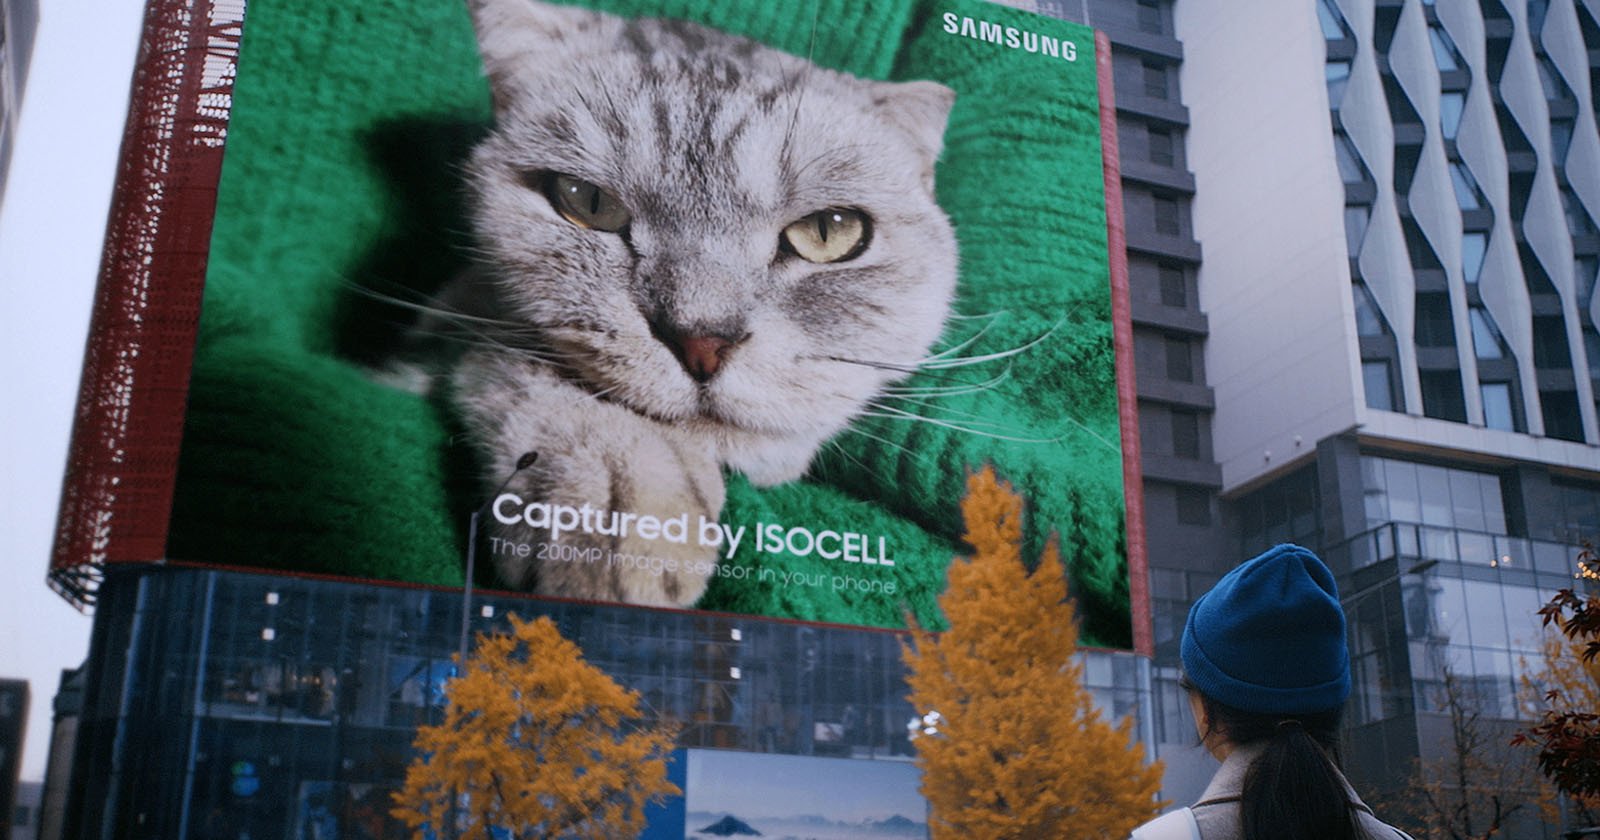  samsung shoots building-size photo its 200mp smartphone 